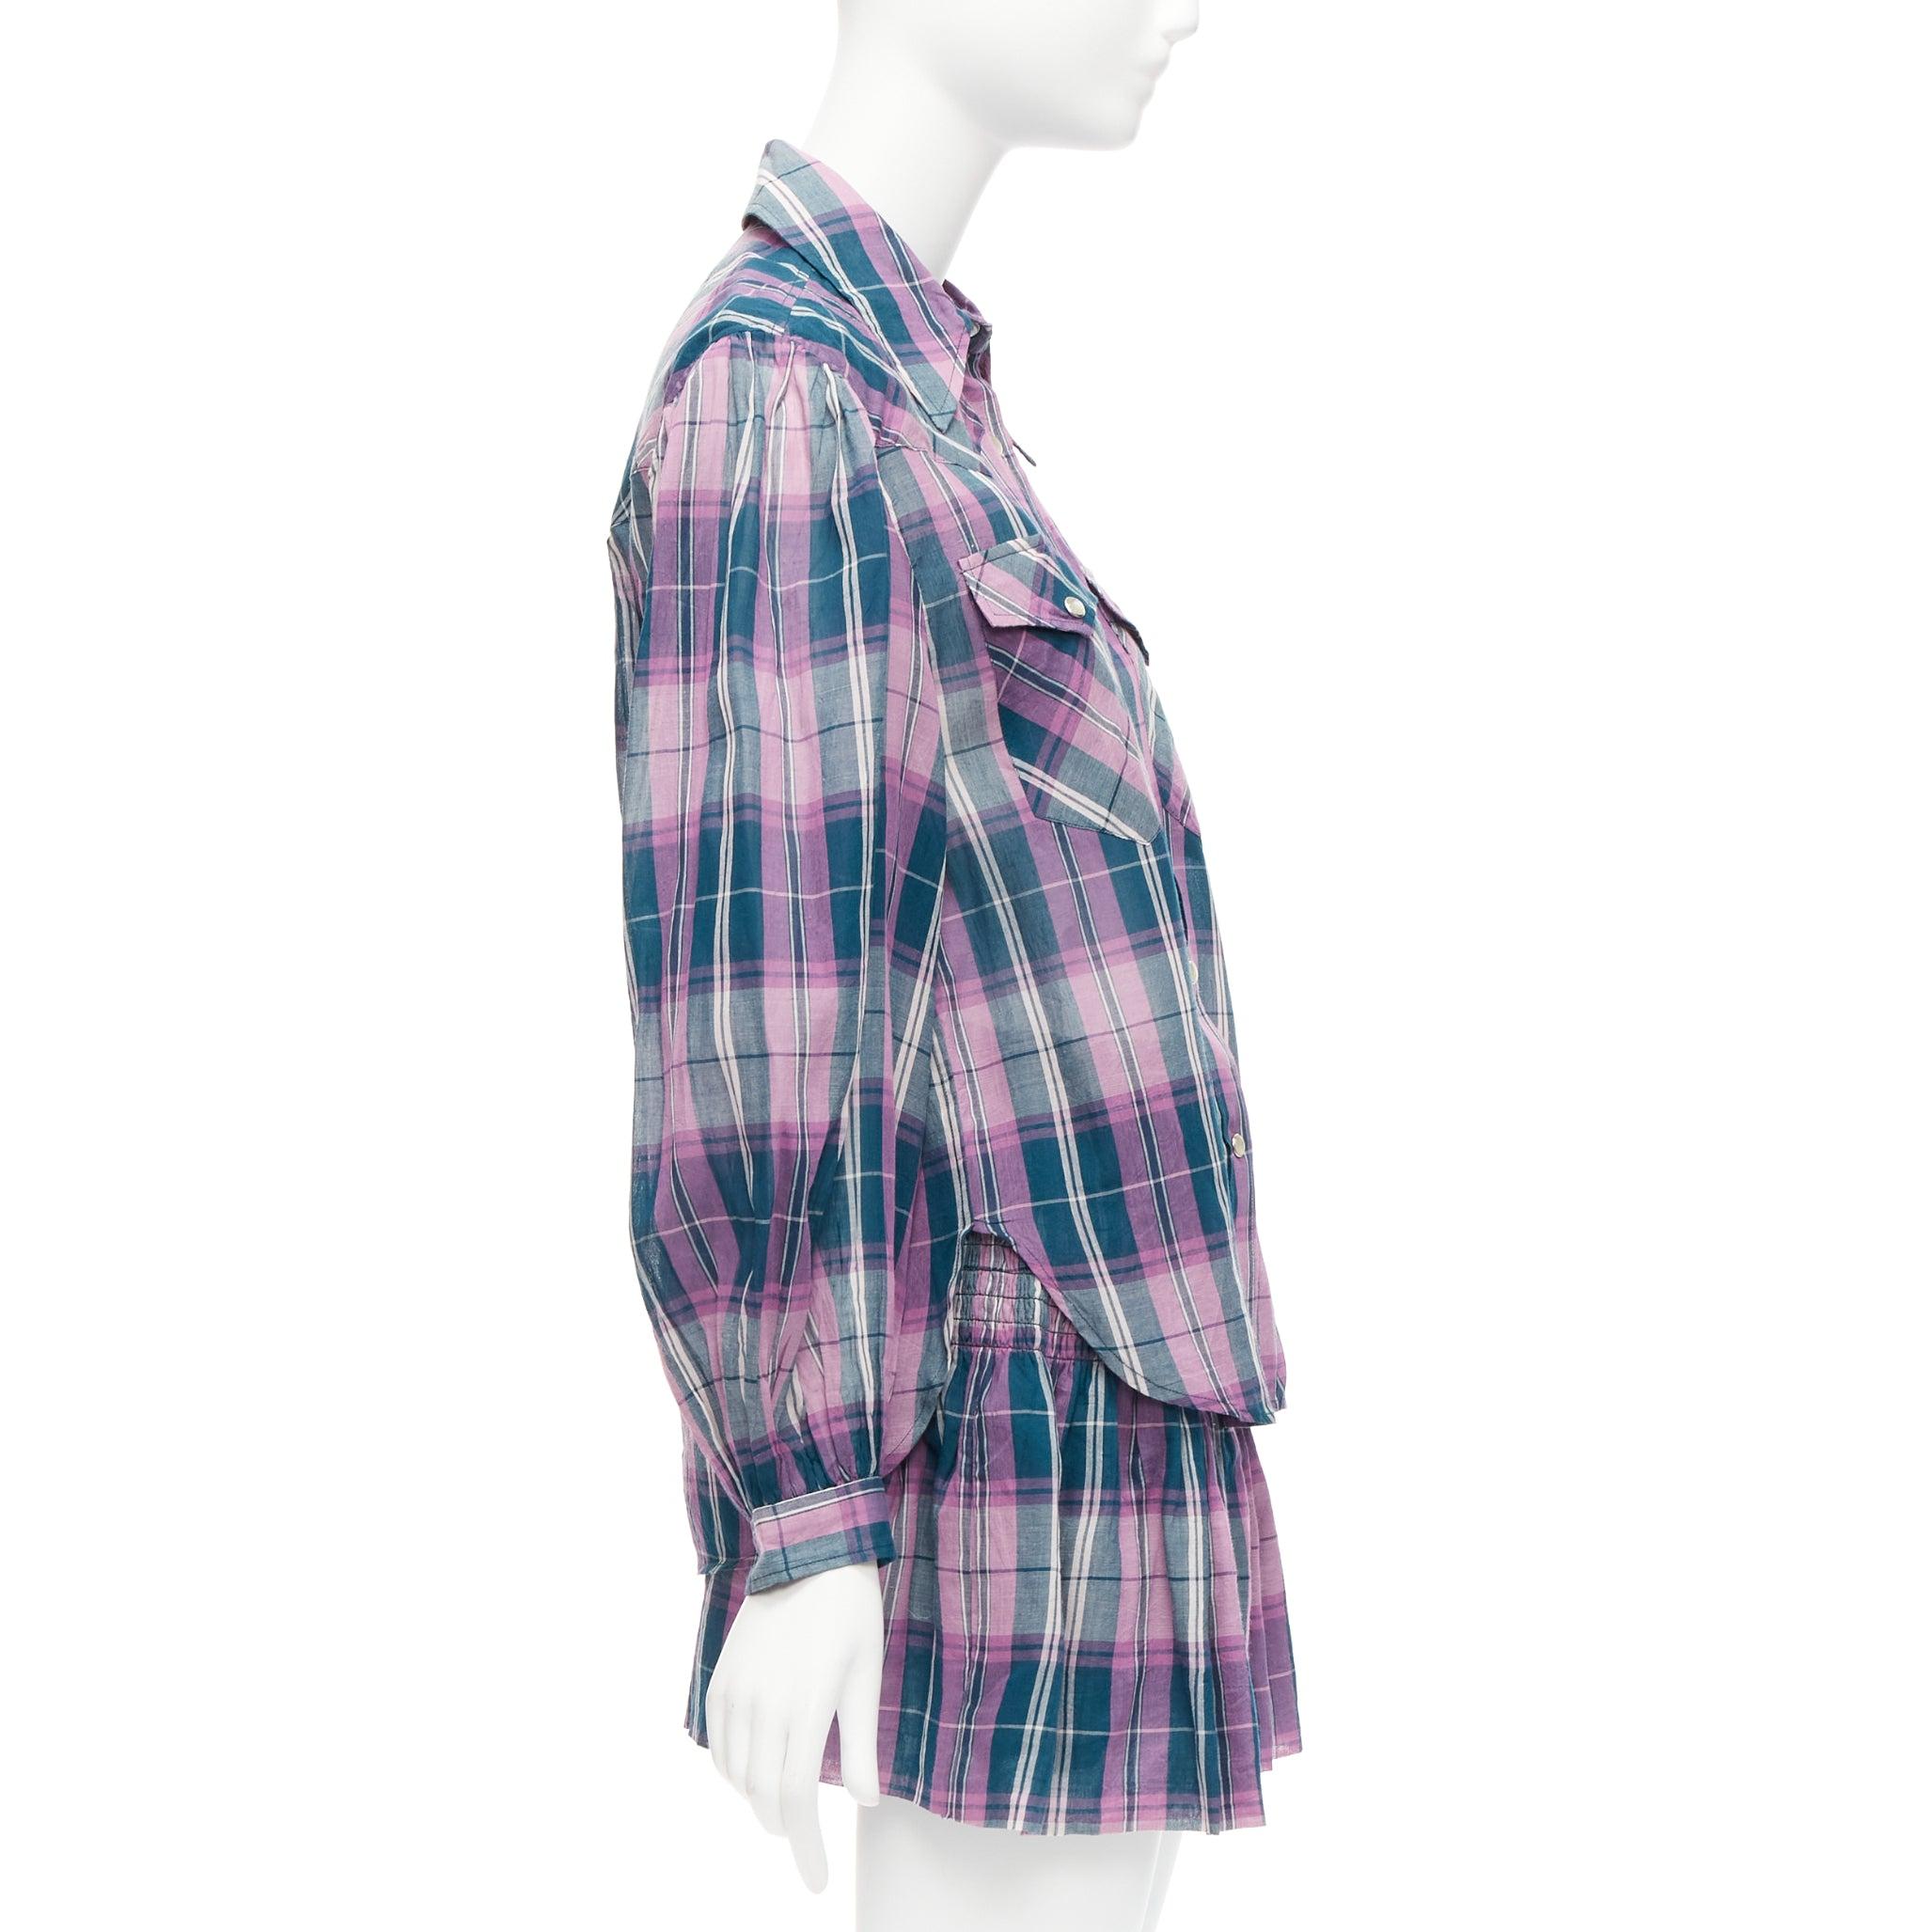 Women's ISABEL MARANT ETOILE Bethany purple cotton check top FR34 XS shorts FR36 S set For Sale